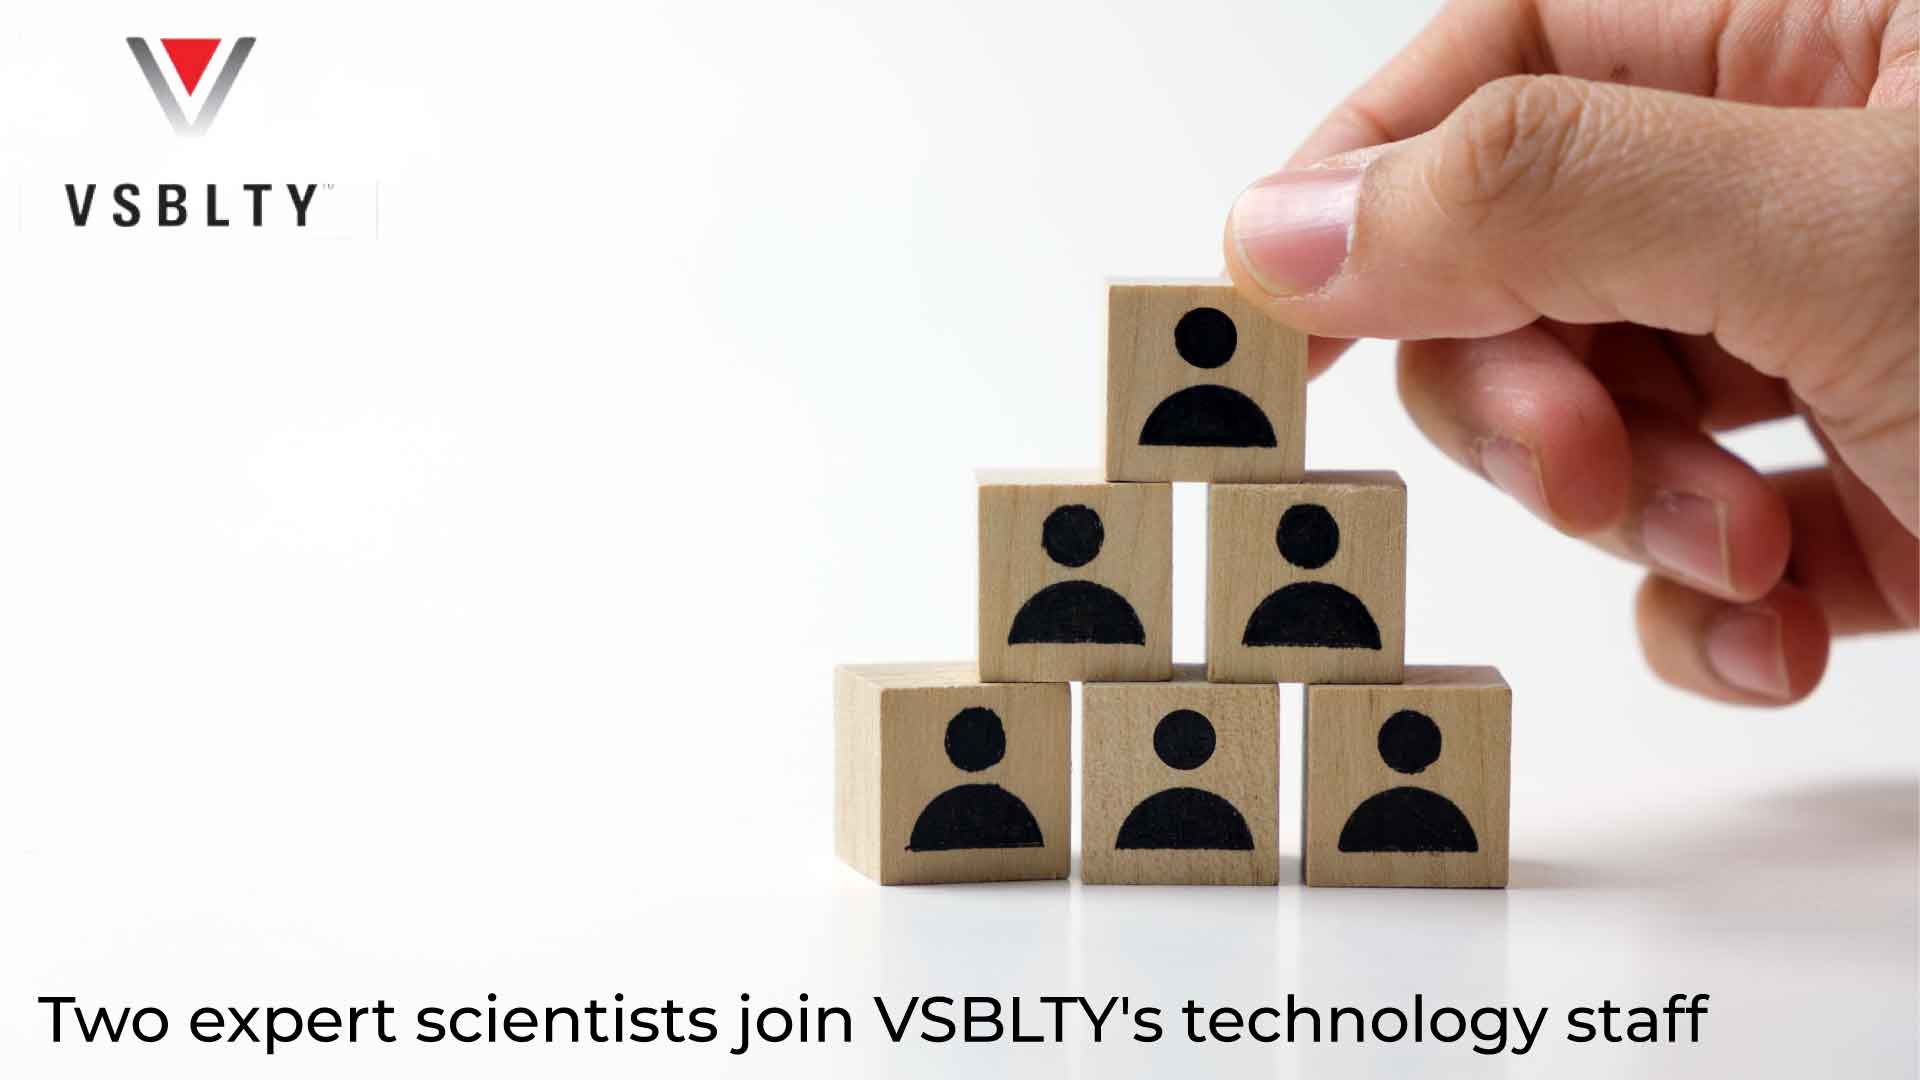 VSBLTY ADDS TWO EXPERT SCIENTISTS TO ITS ENGINEERING STAFF